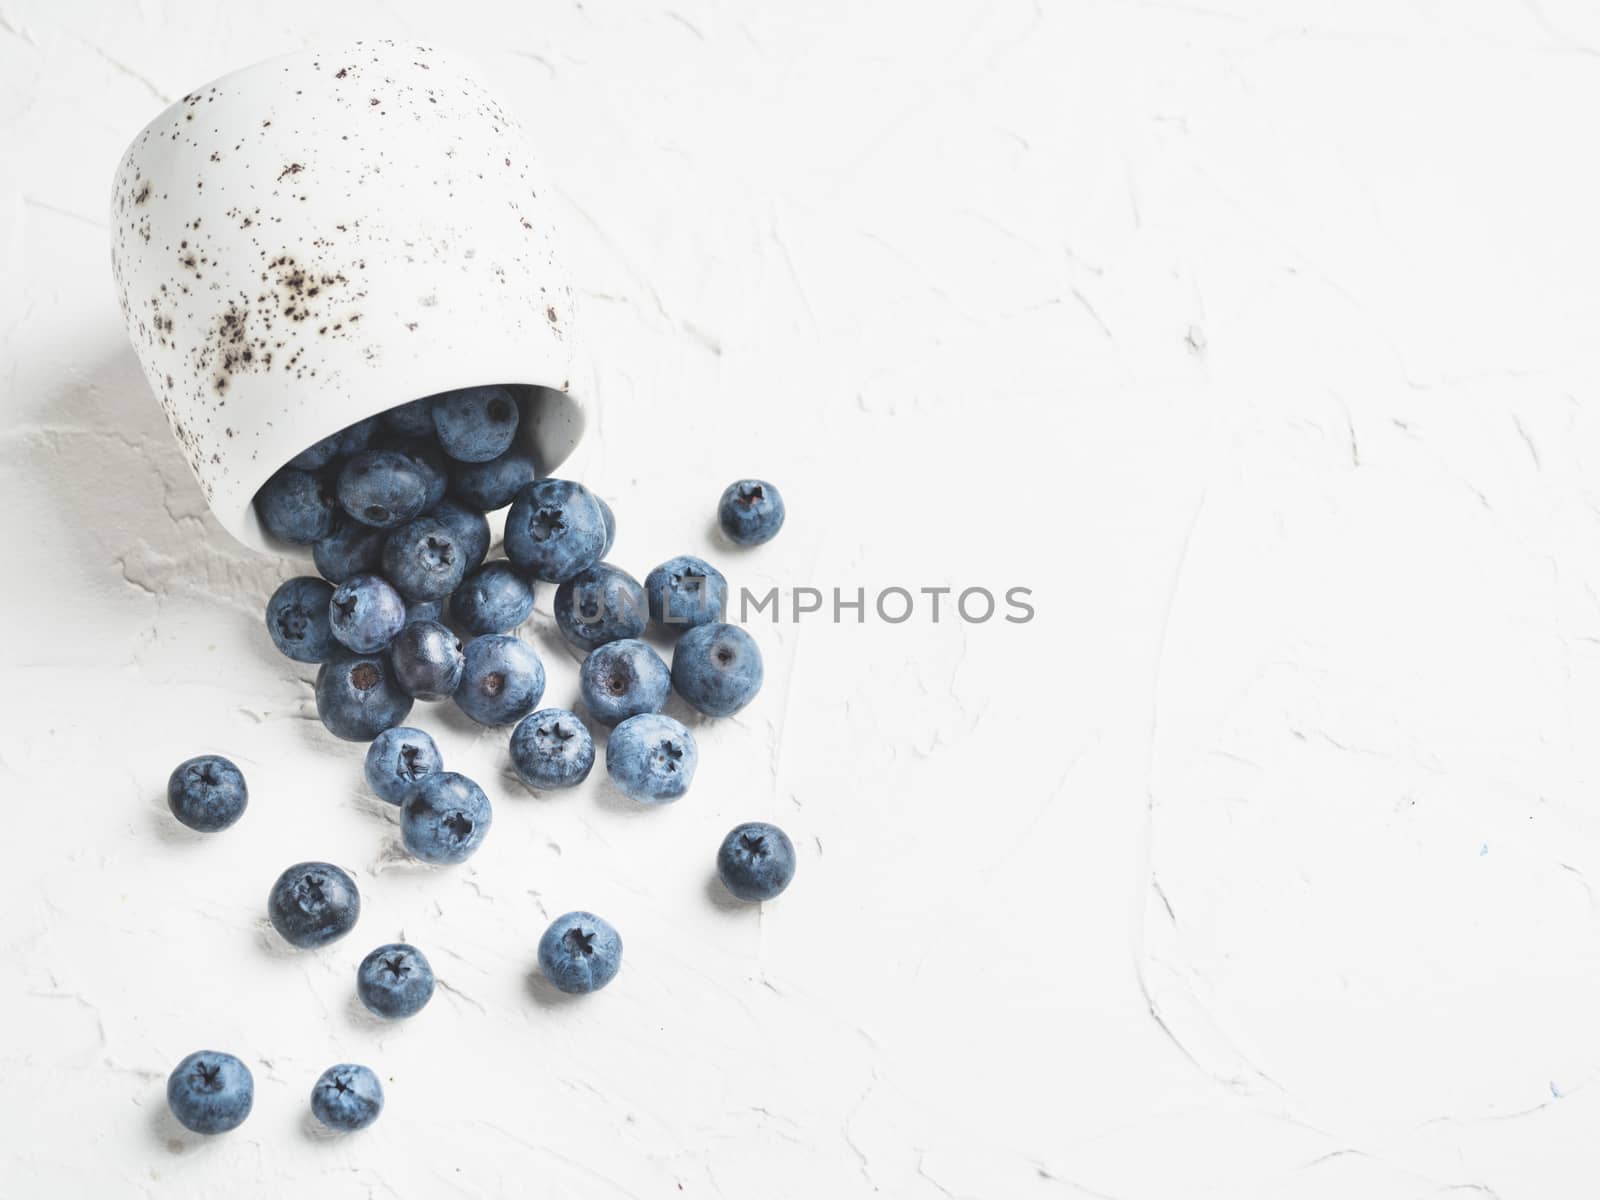 Blueberries on white concrete background. Blueberry border design. Fresh picked bilberries scattered close up. Copyspace. Closeup